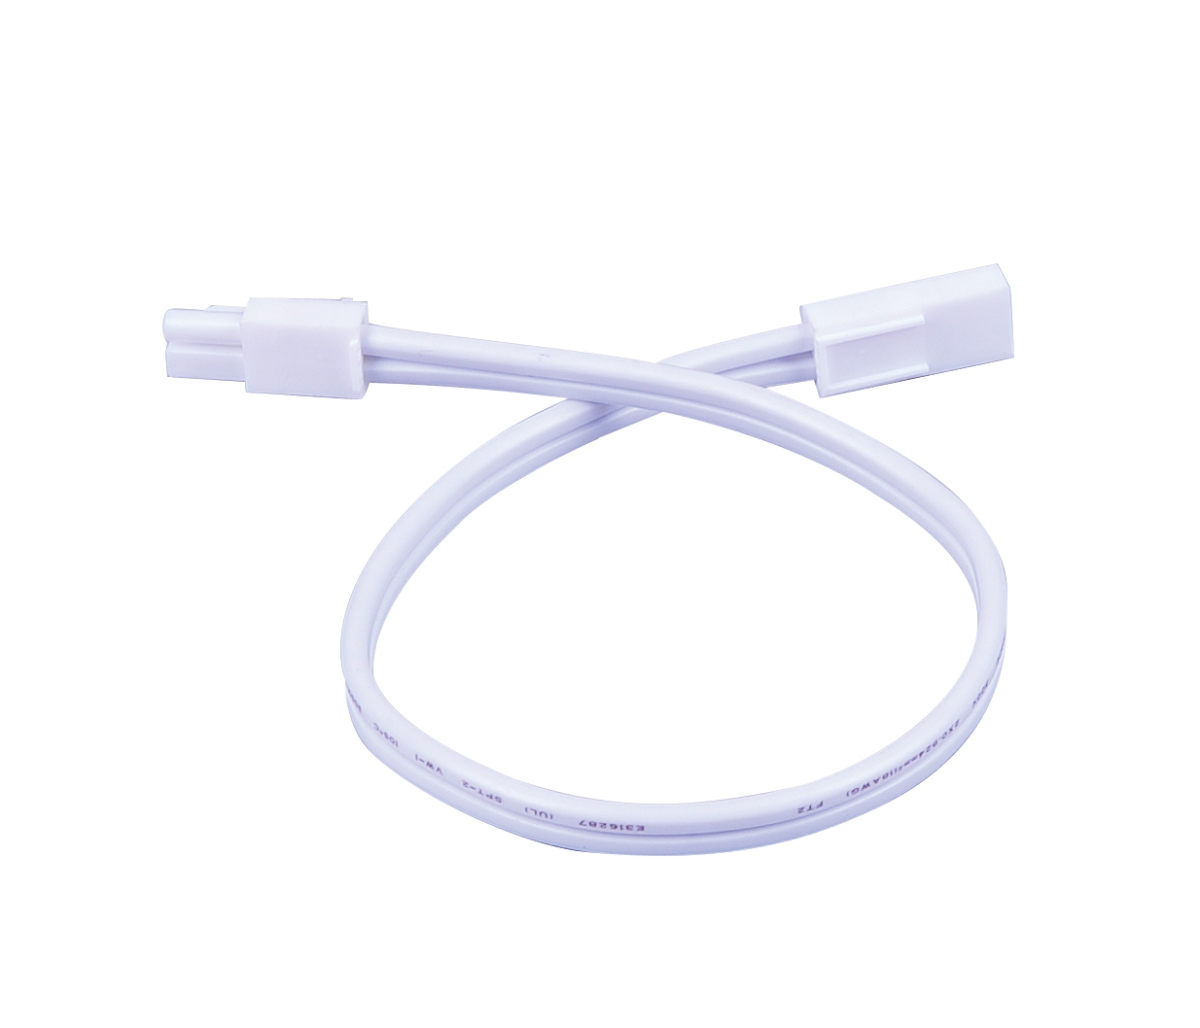 Countermax Mx-ld-ac Led 12 In. Connecting Cord - White